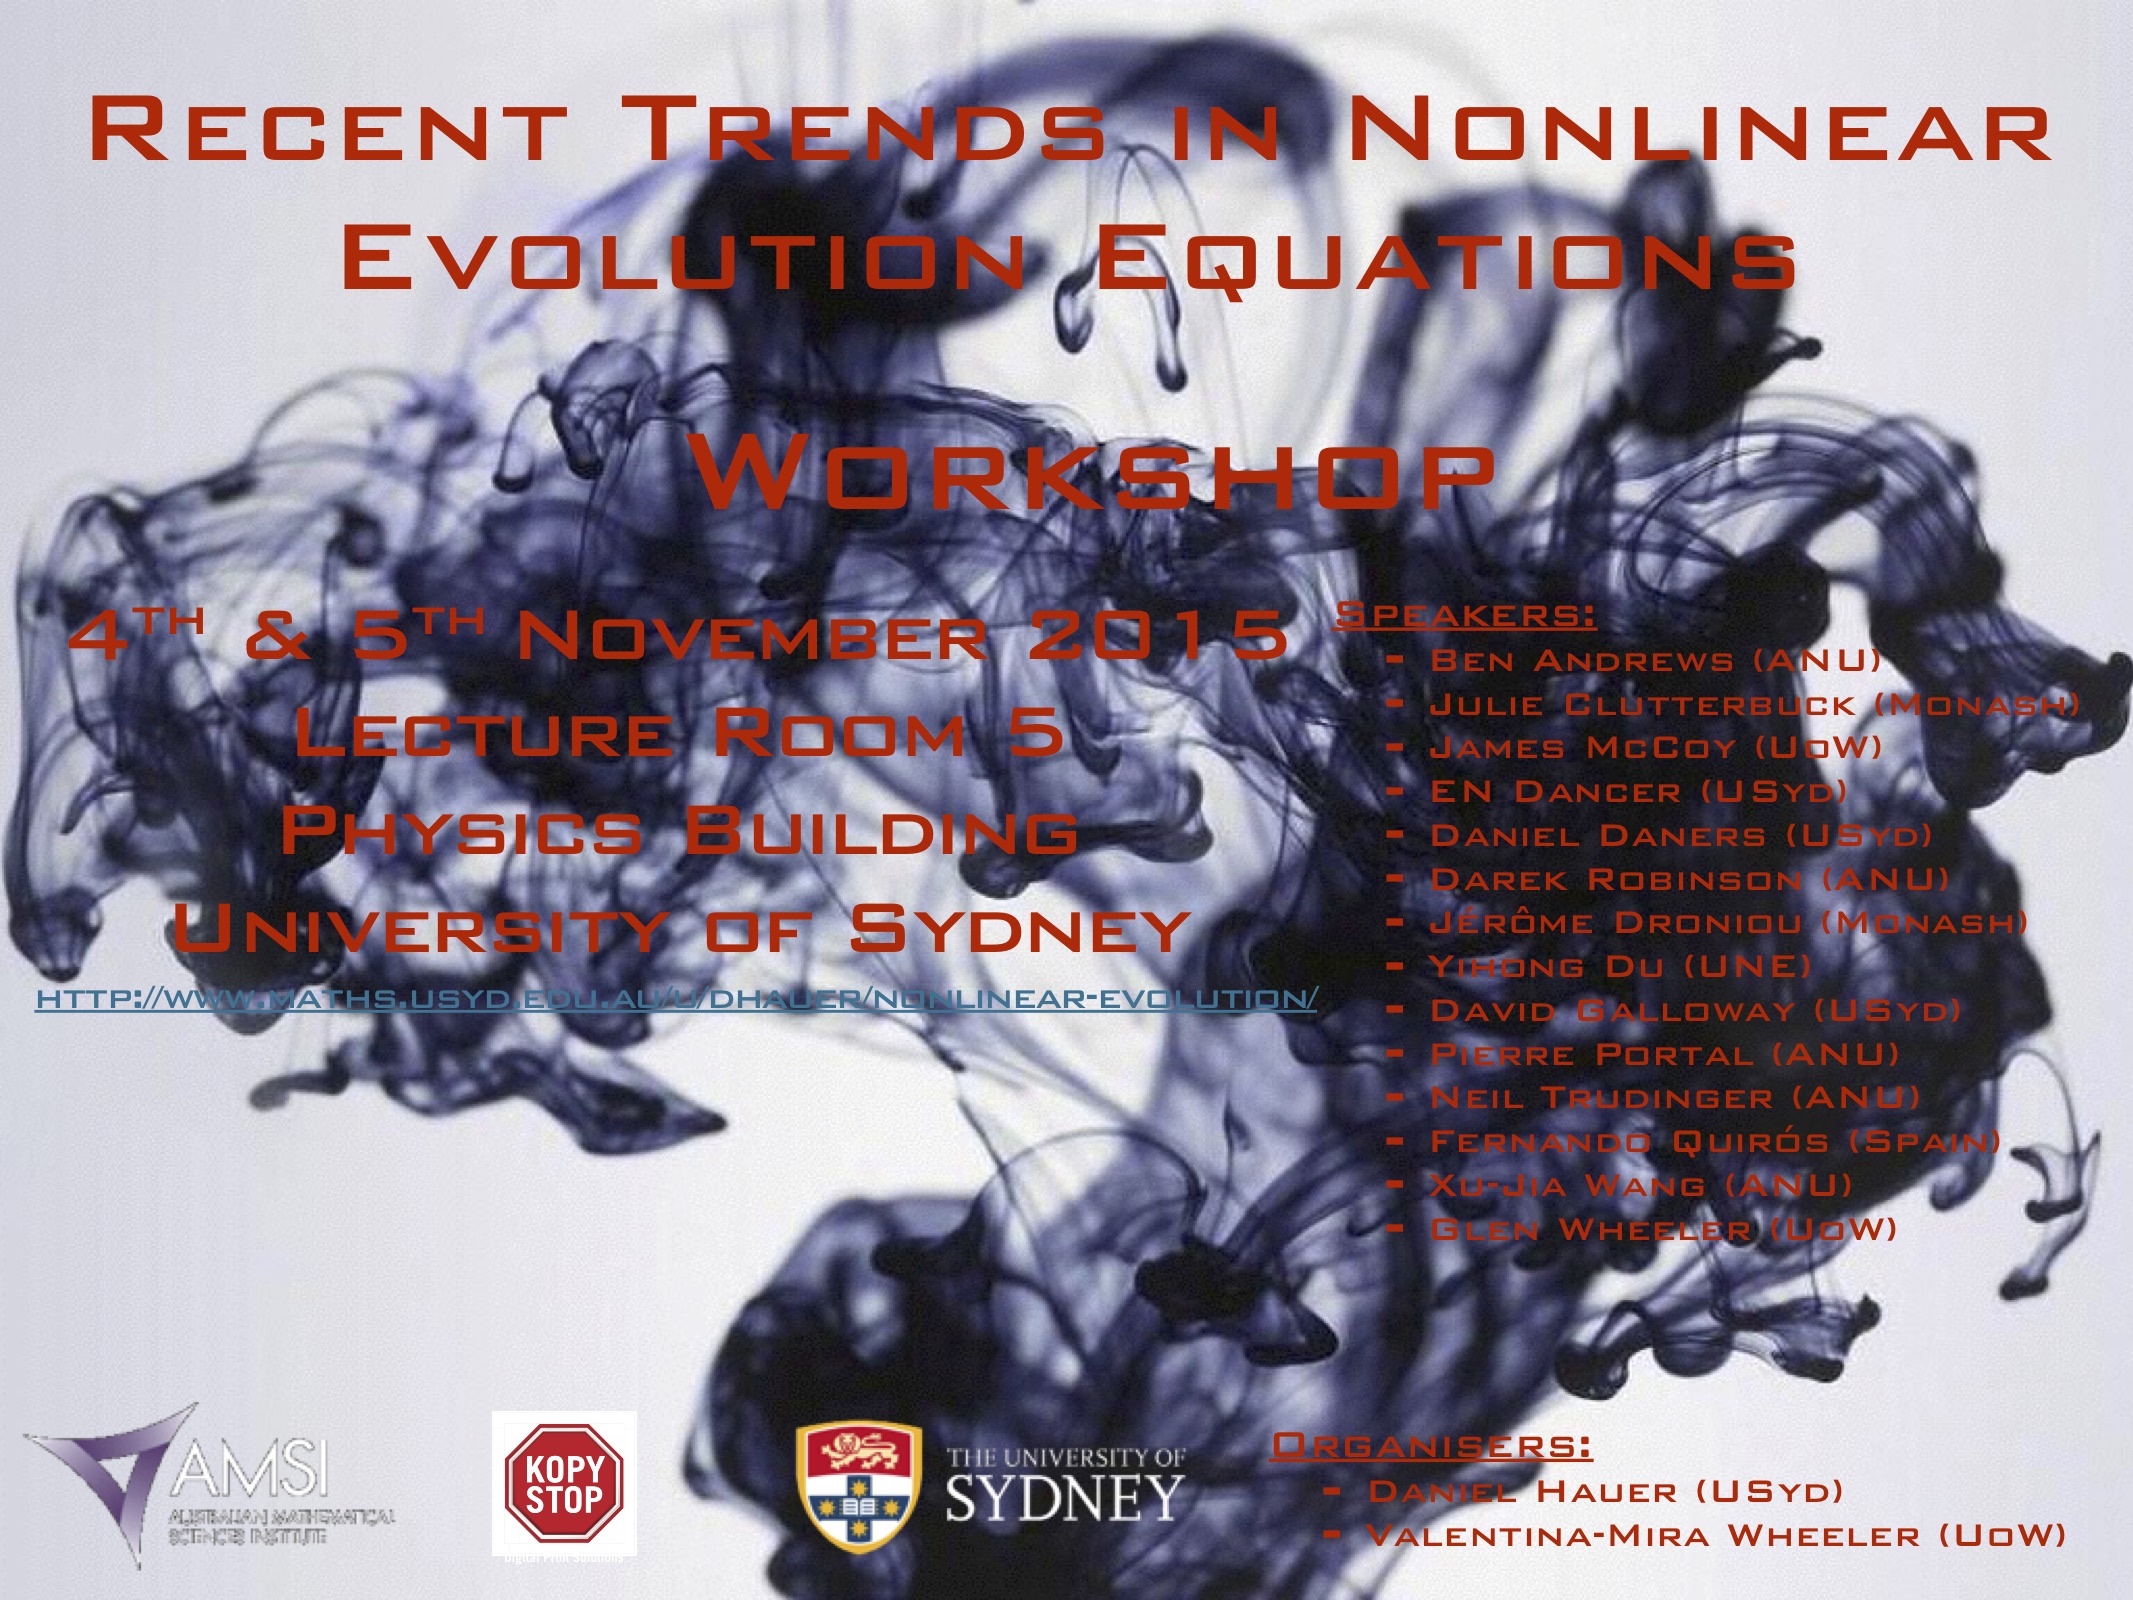 Recent Trends in Nonlinear Evolution Equations (2015)